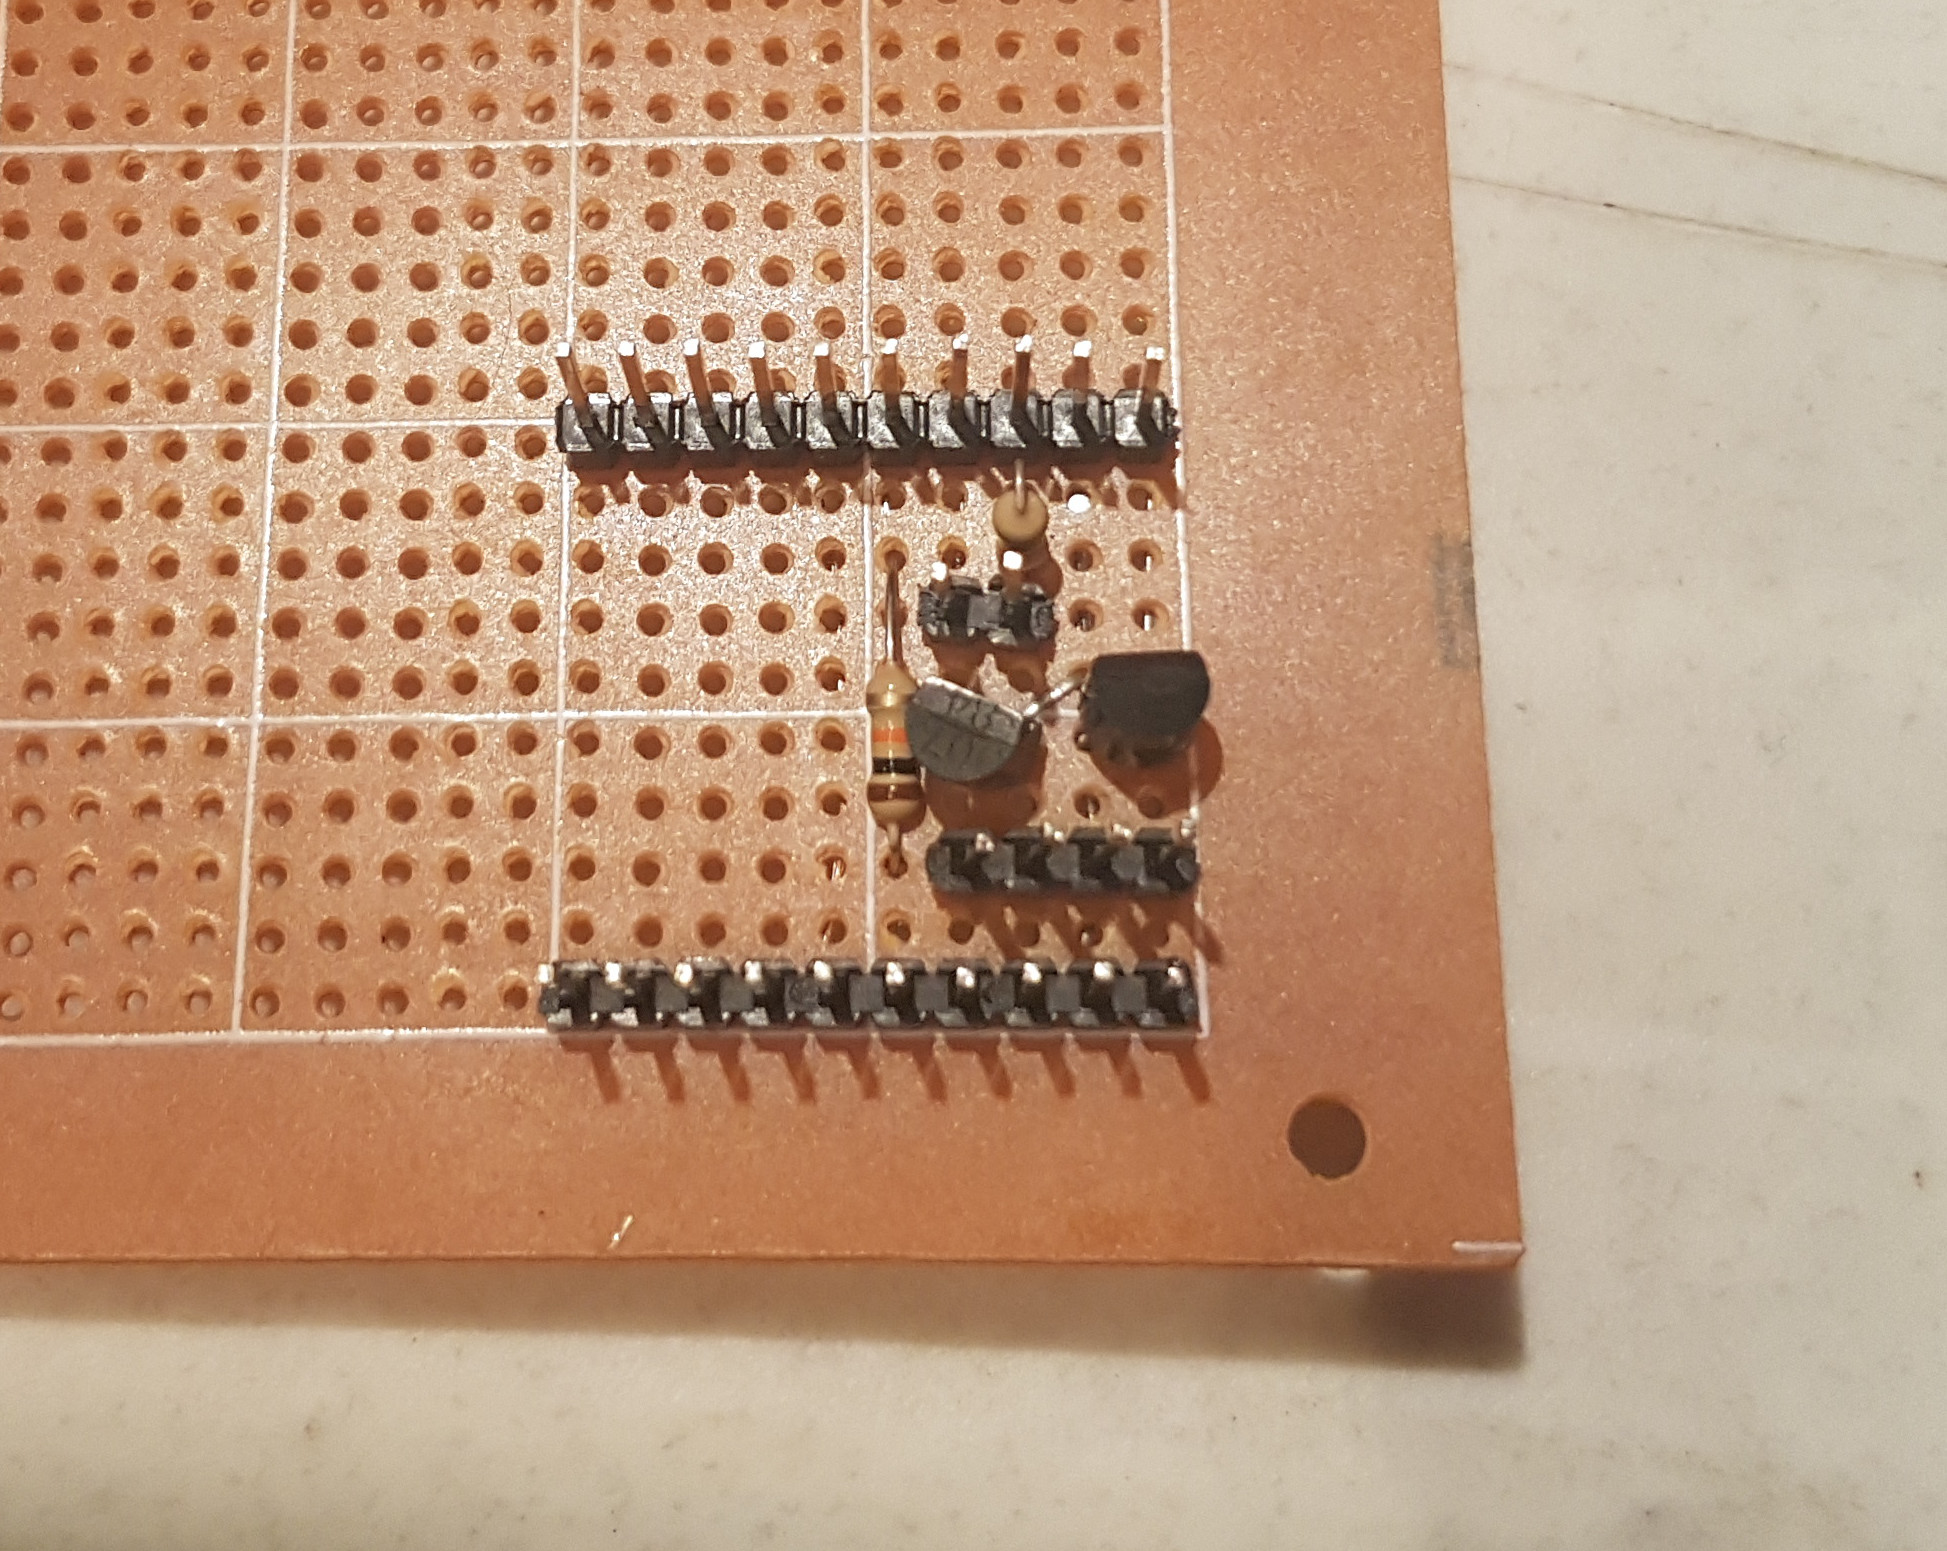 The finished breadboard